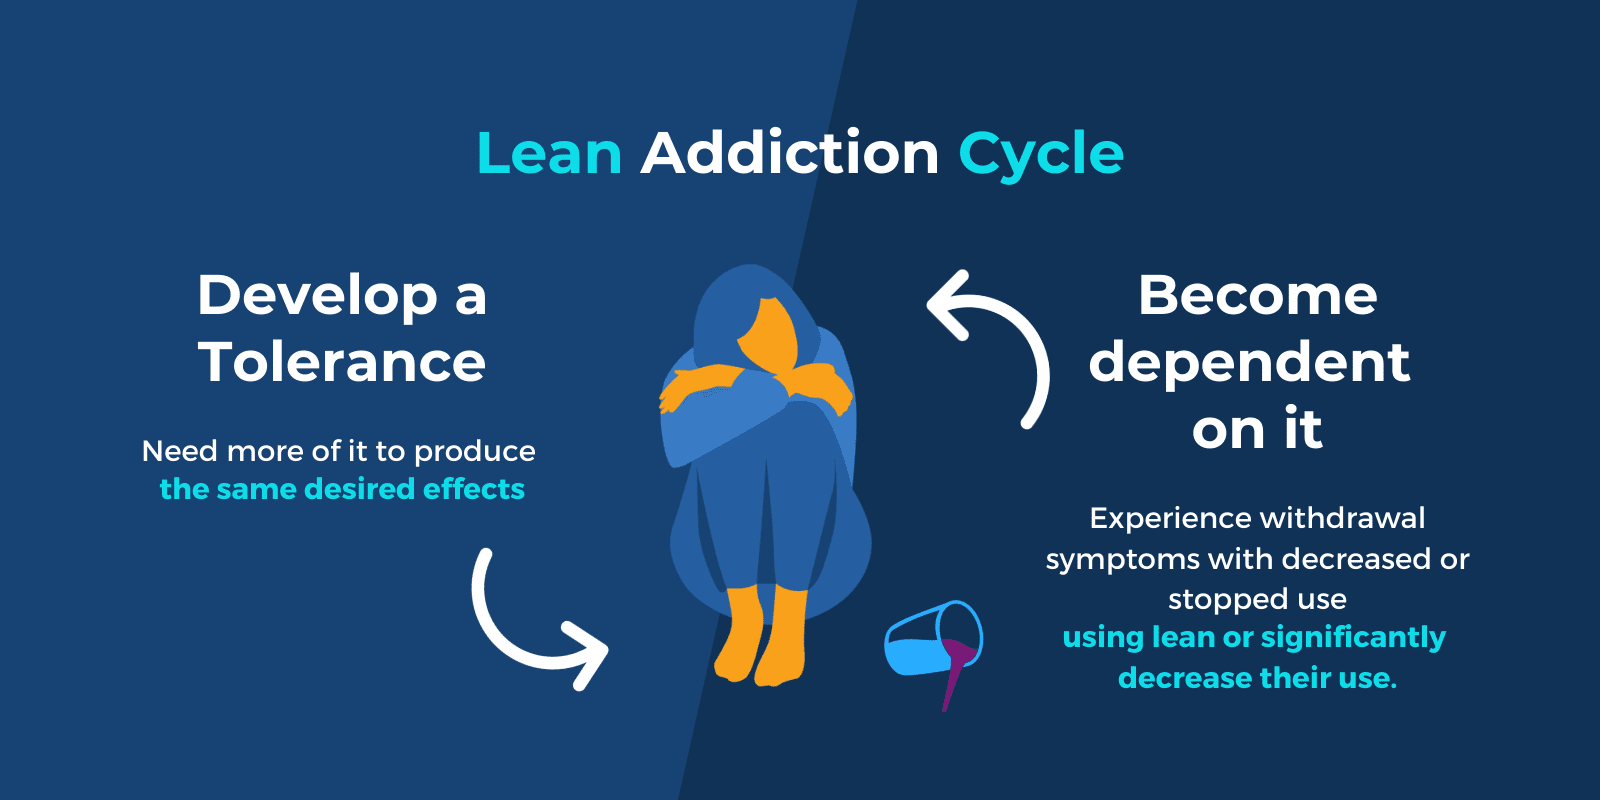 "Lean Addiction Cycle" written above the content that shows the addiction cycle through developing a tolerance and becoming dependant on it